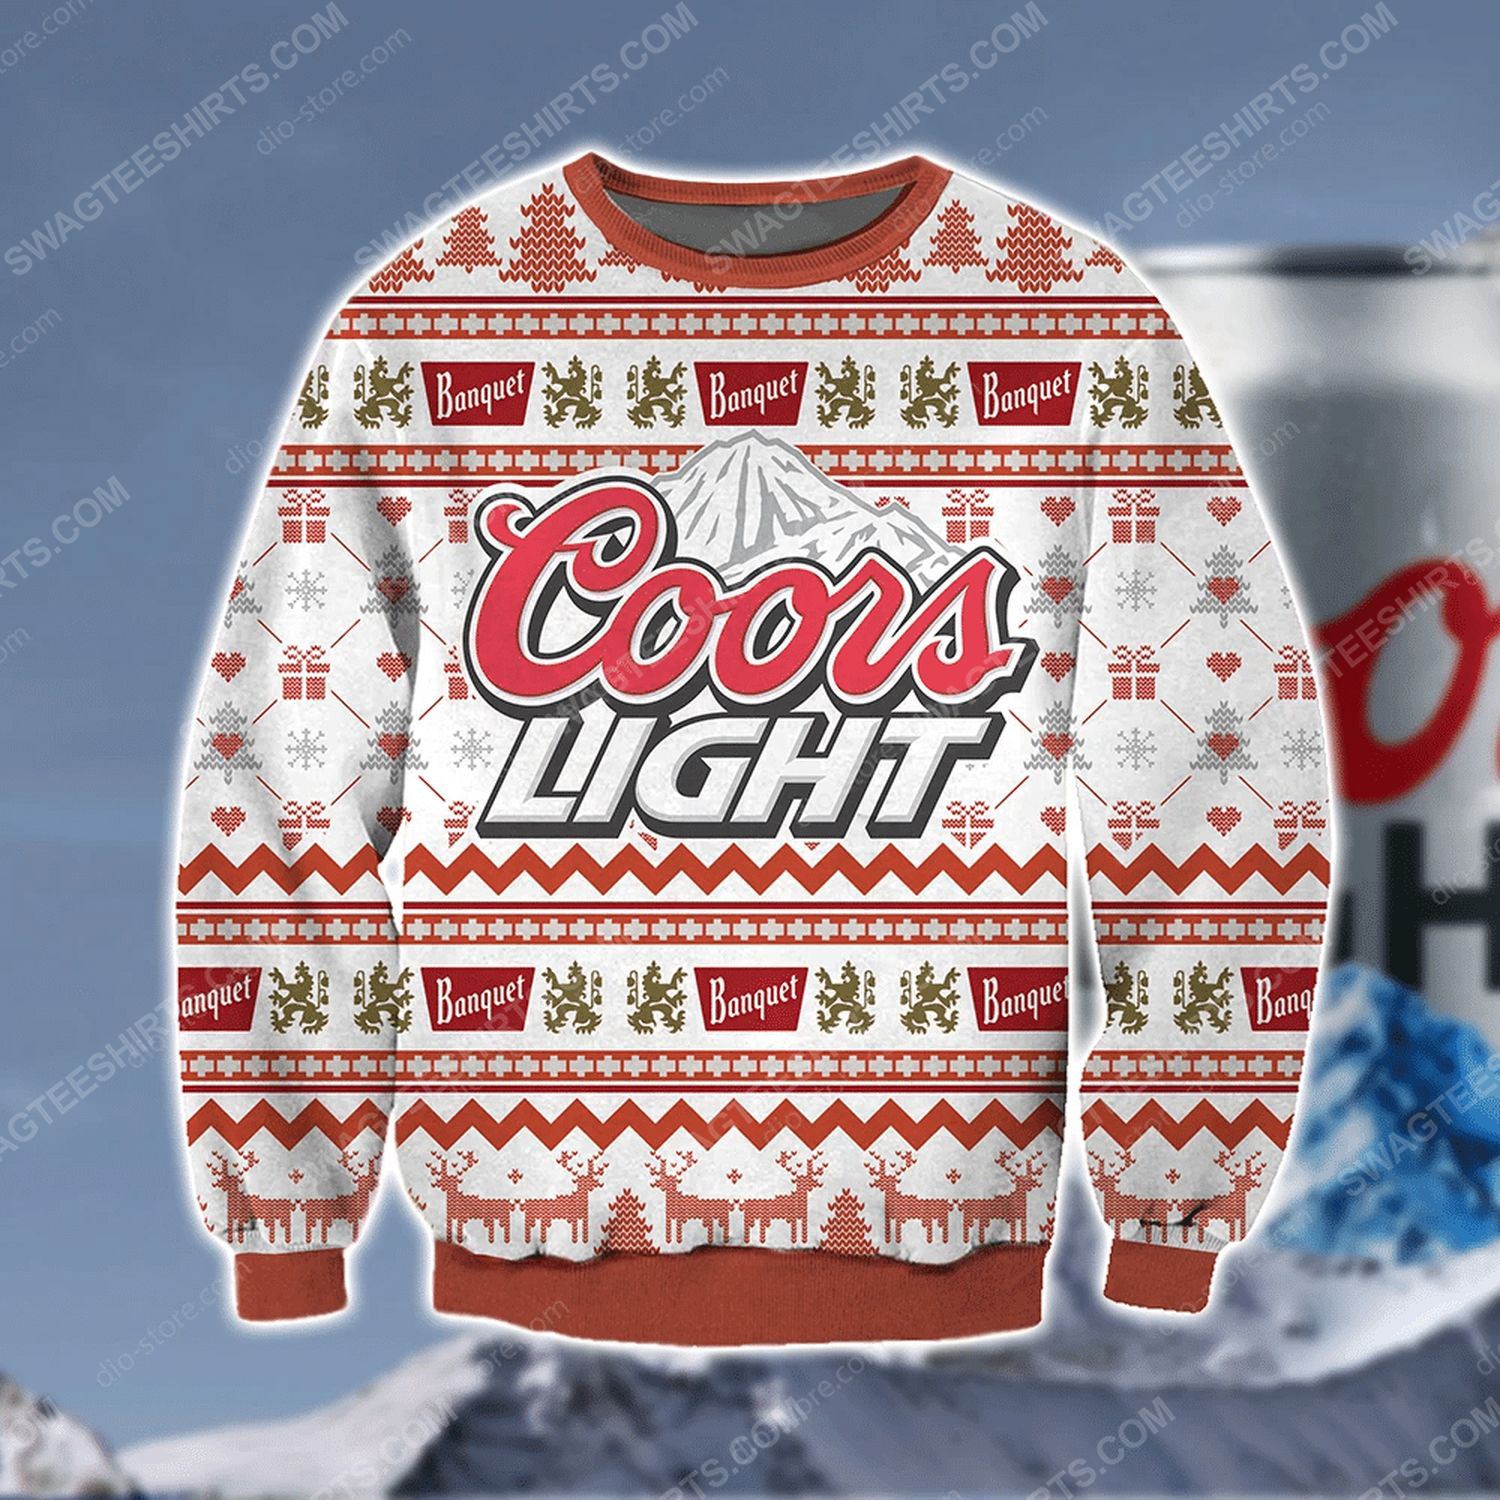 Coors light banquet beer ugly christmas sweater - Copy